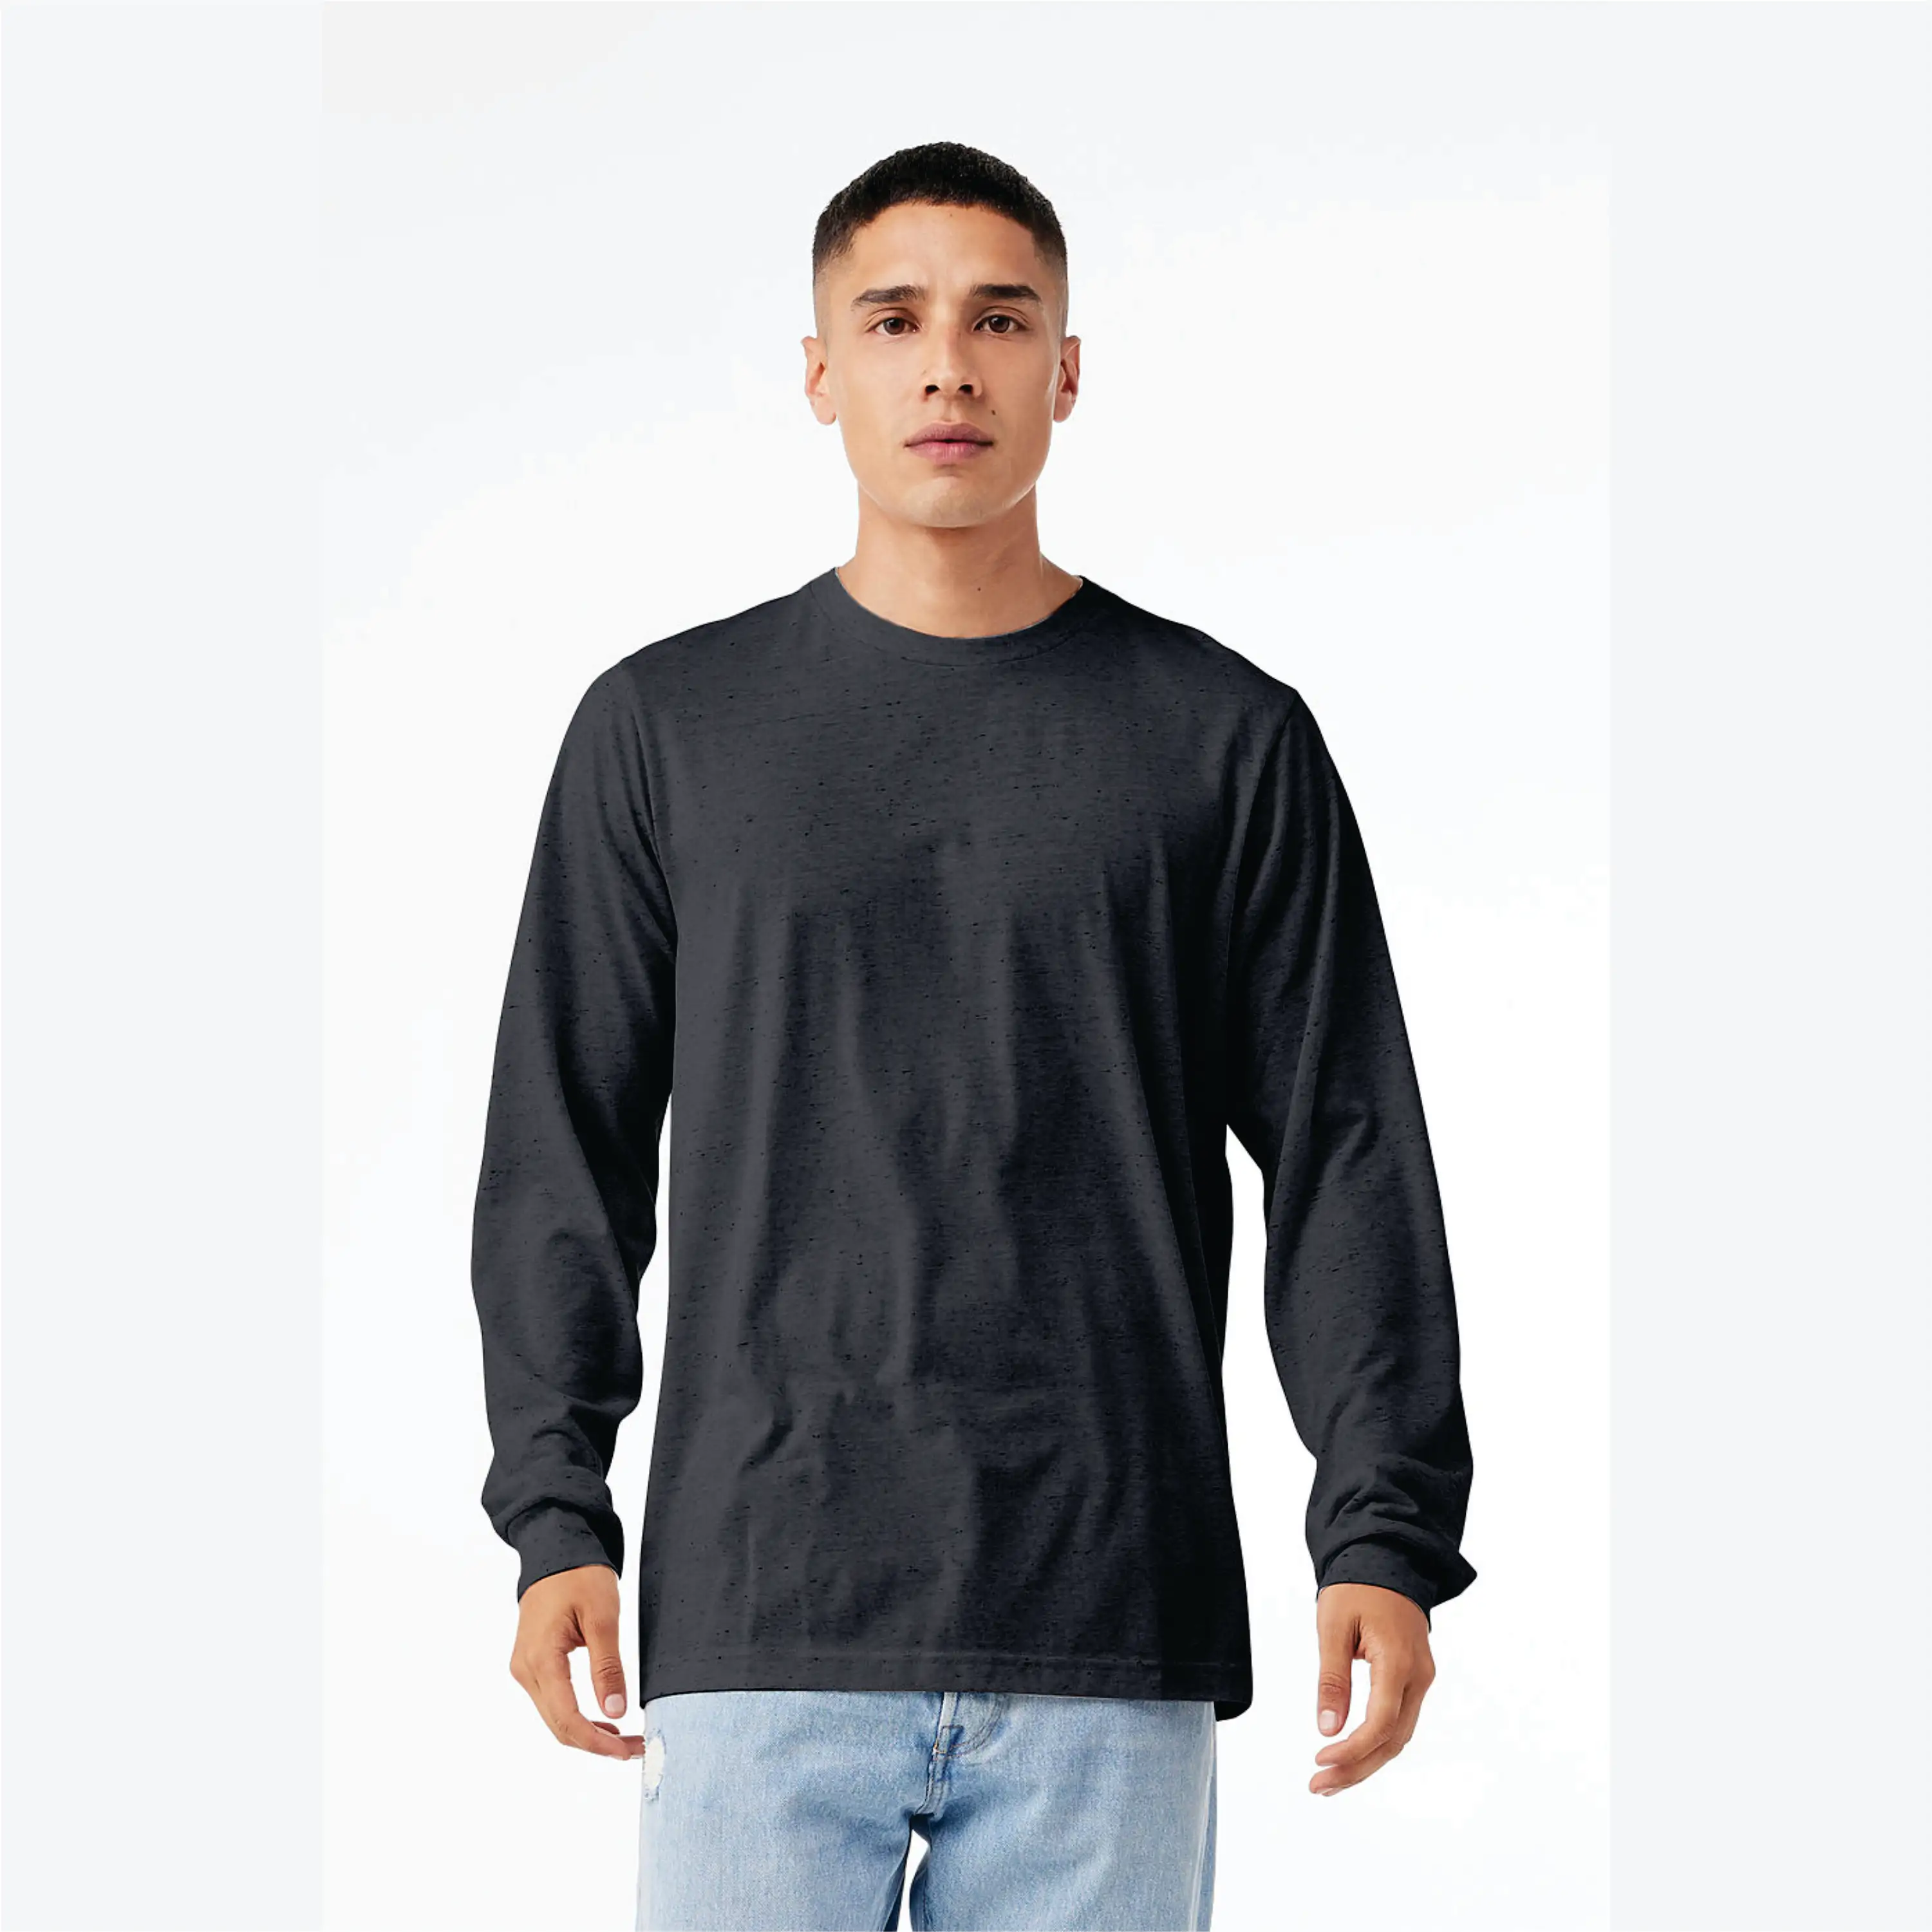 52% Airlume Combed and Ring Spun Cotton 48% Poly 32 Single 4.2 oz Dark Grey Unisex Heather CVC Long Sleeve T-Shirt